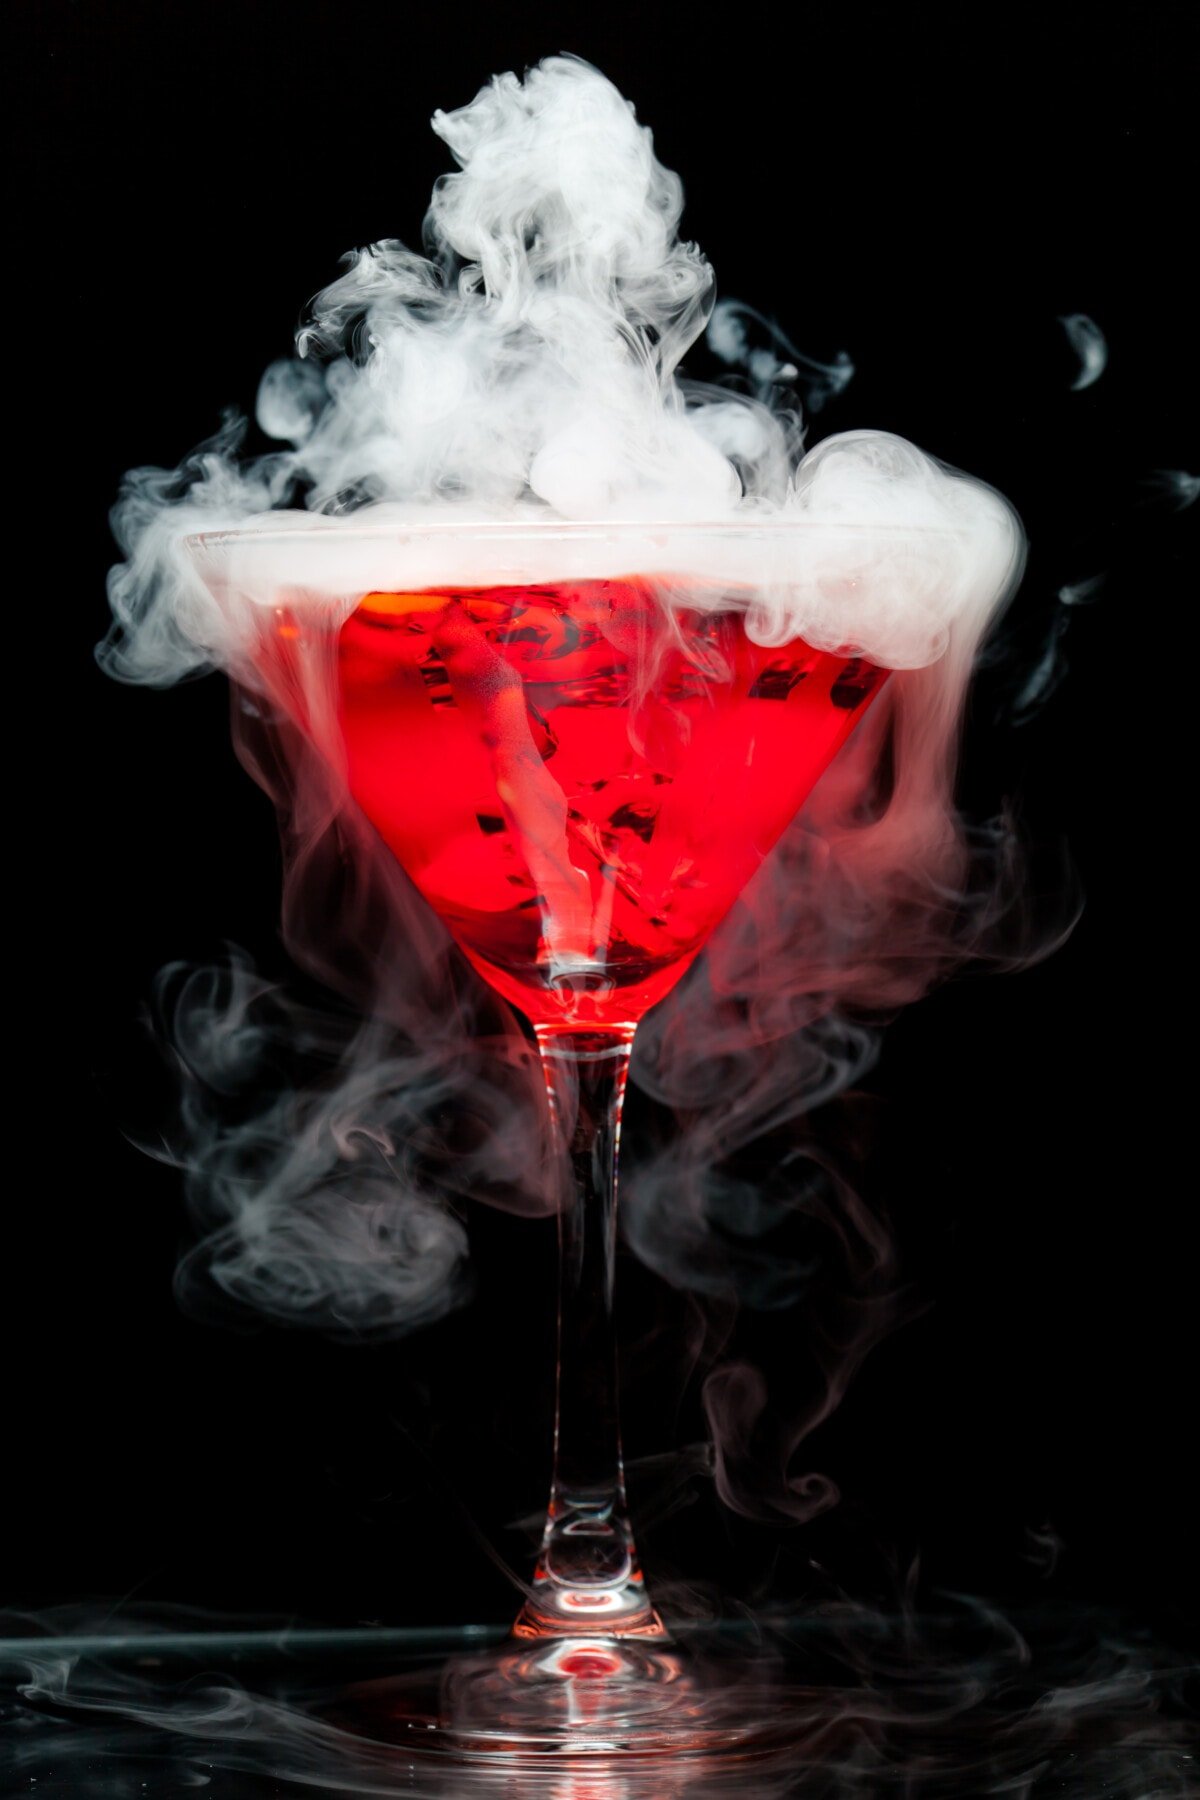 dry ice in a martini glass